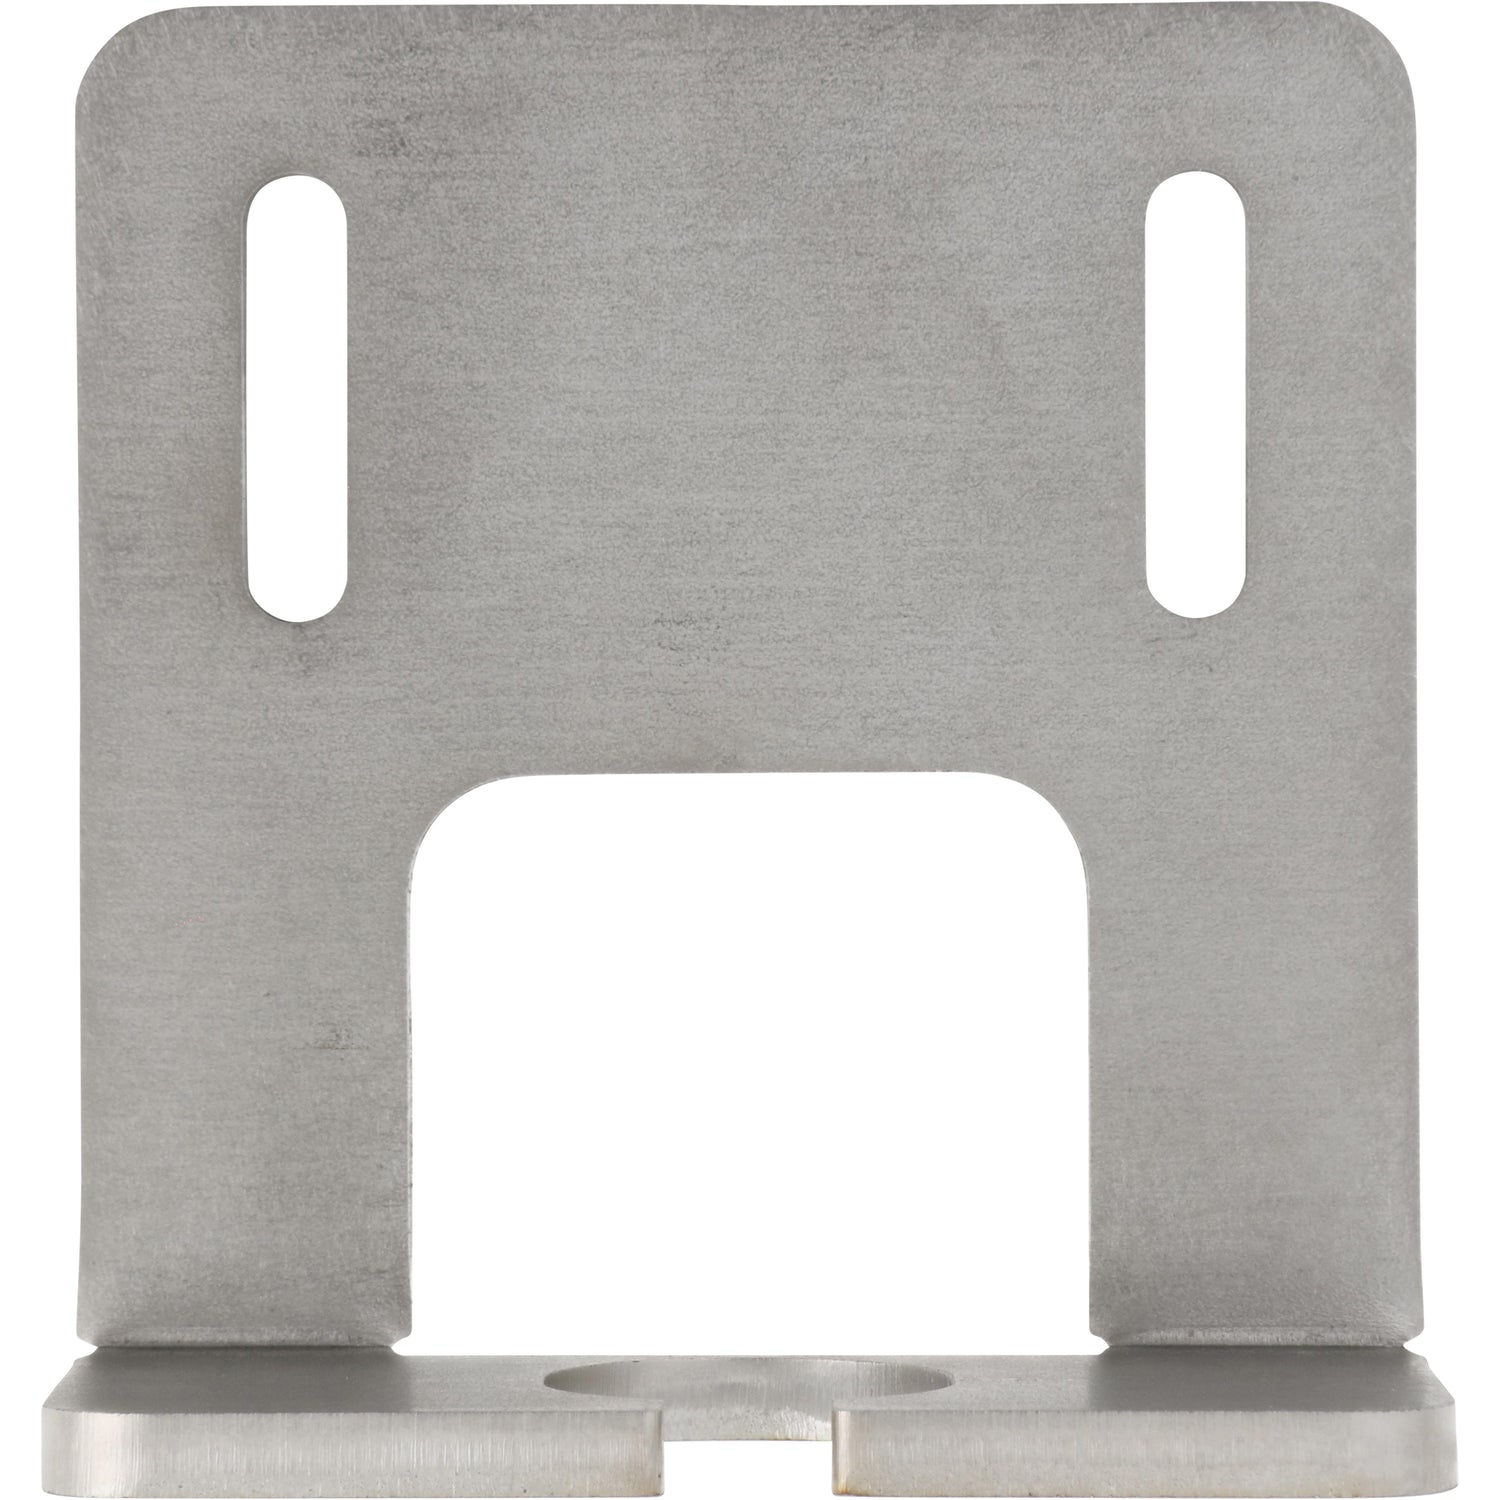 Rectangular stainless steel part with 90 degree bend. The part has multiple holes cut into it and is shown on a white background. 